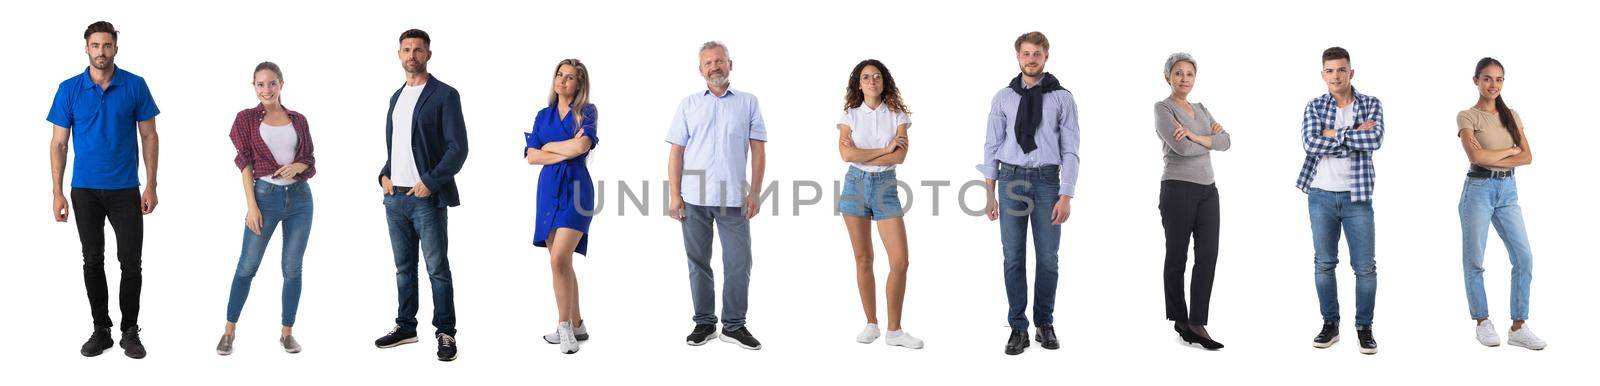 Collection of full length portrait of people in casual clothes isolated on white background